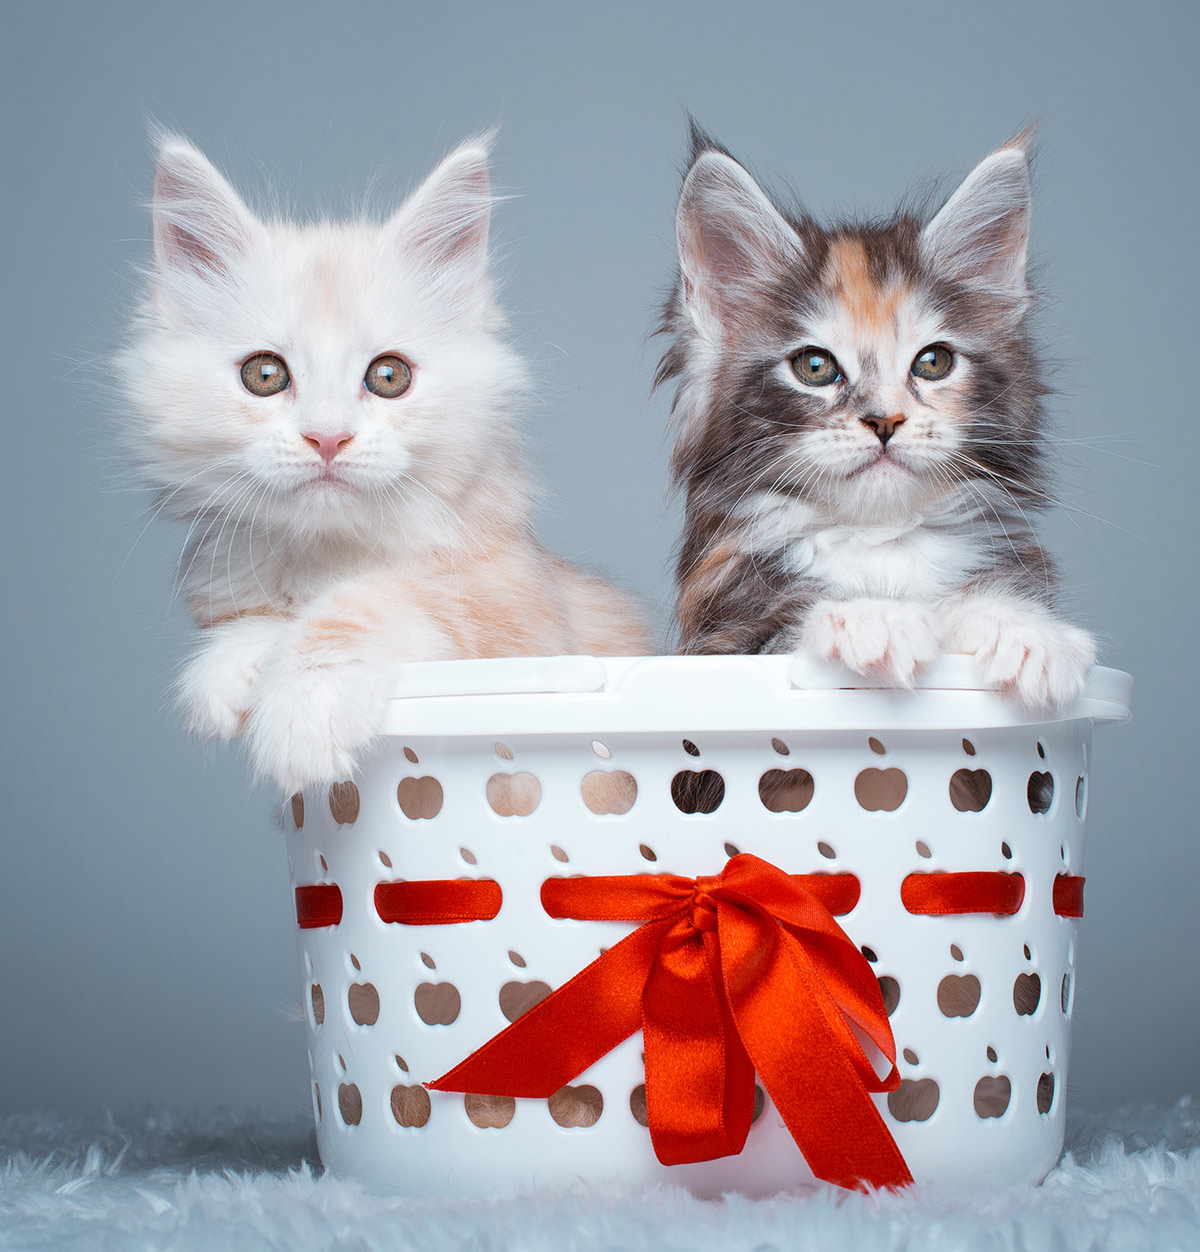 Pictures of Maine Coon kittens